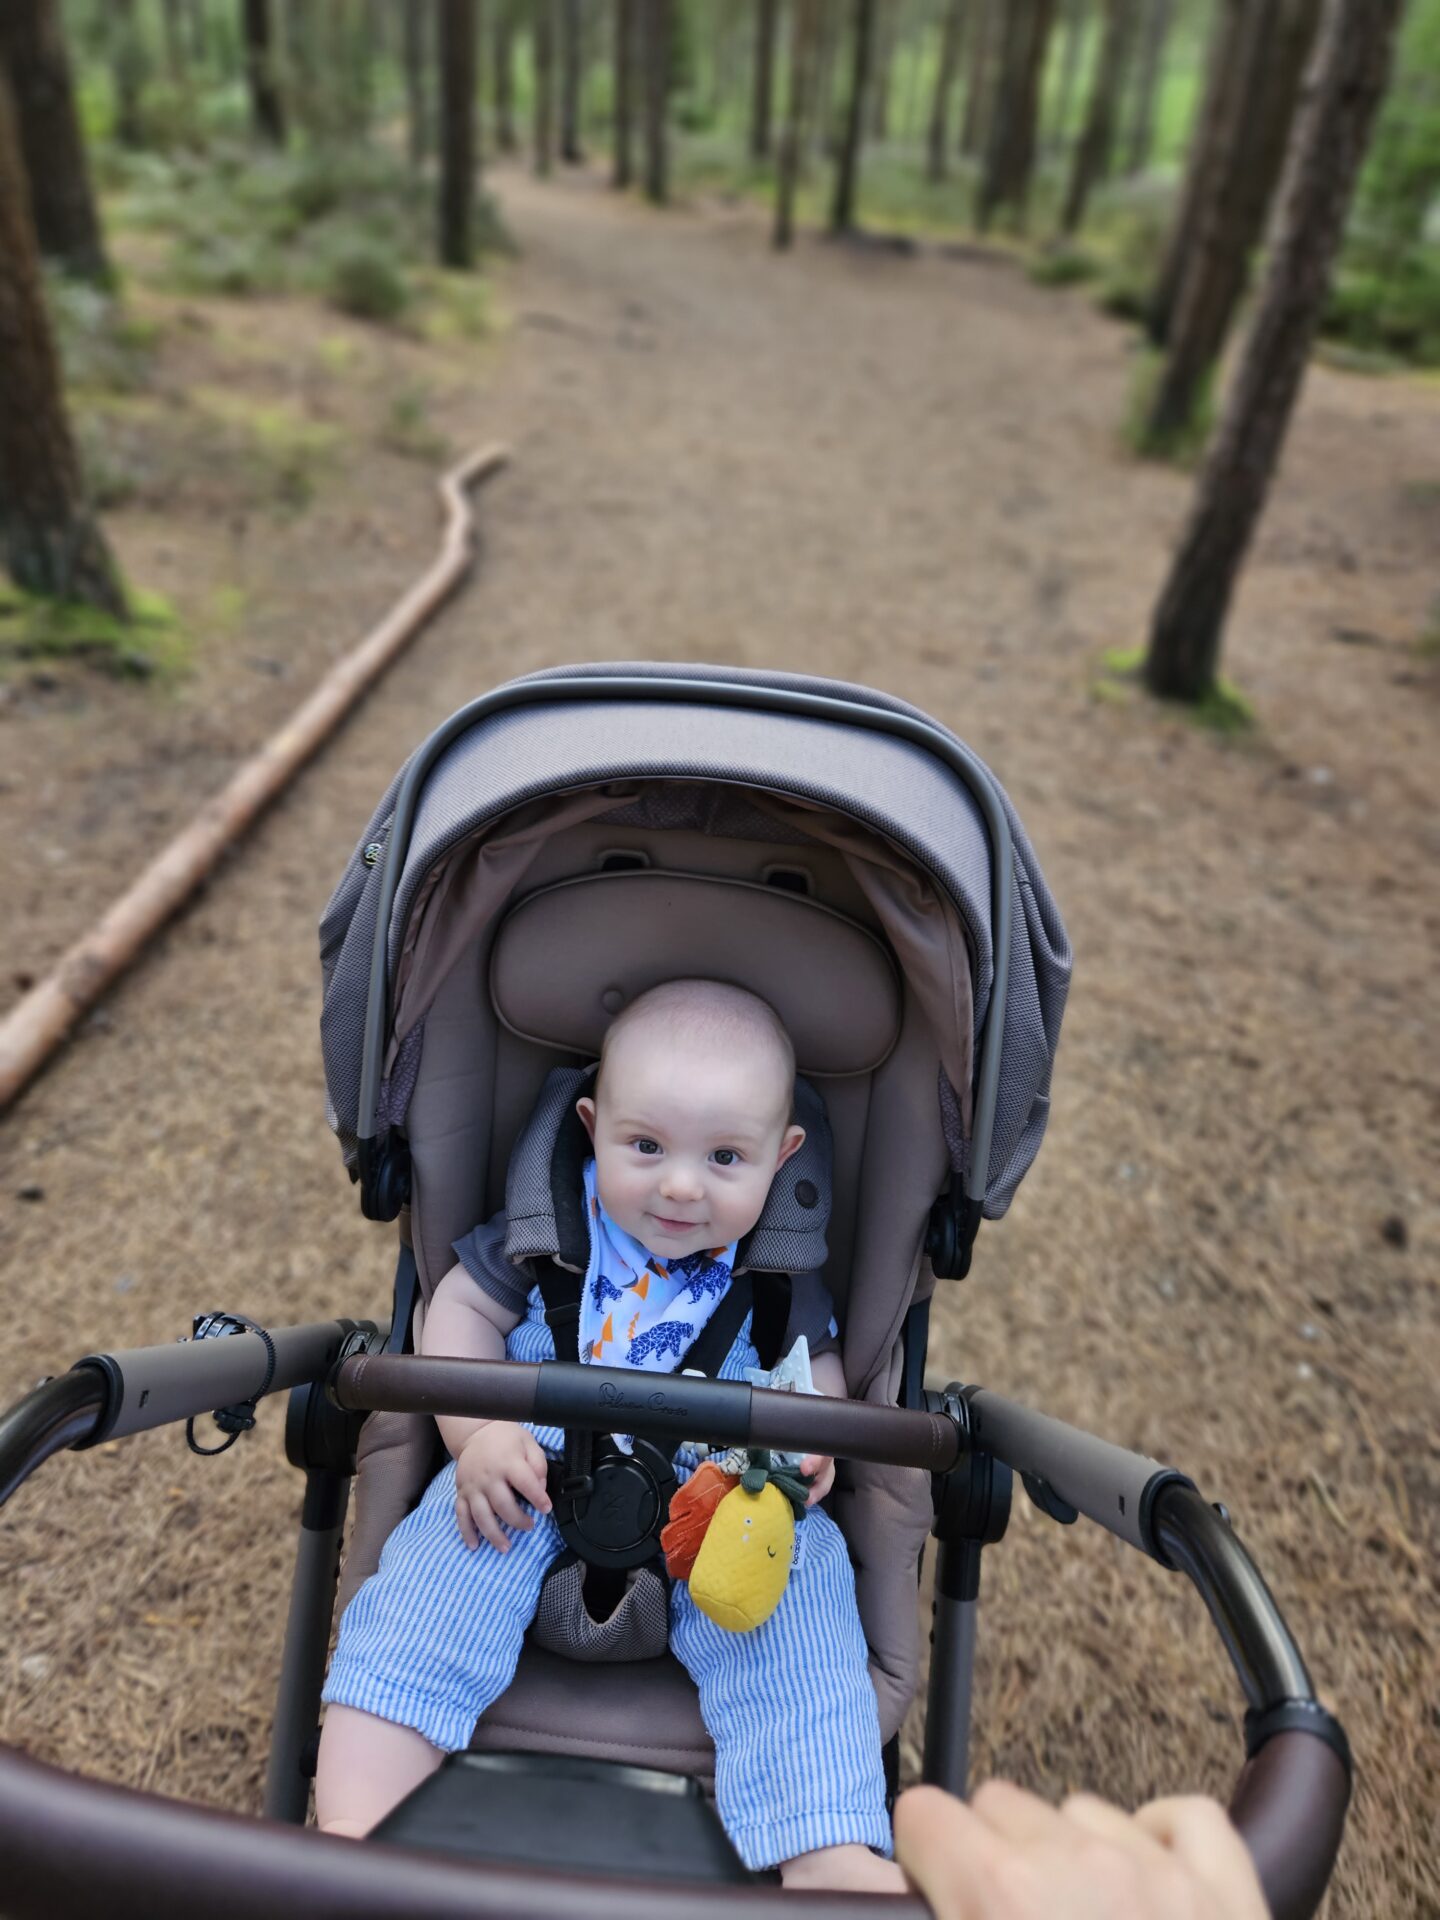 baby sits in a pushchair smiling at the camera as he is being pushed through a forest